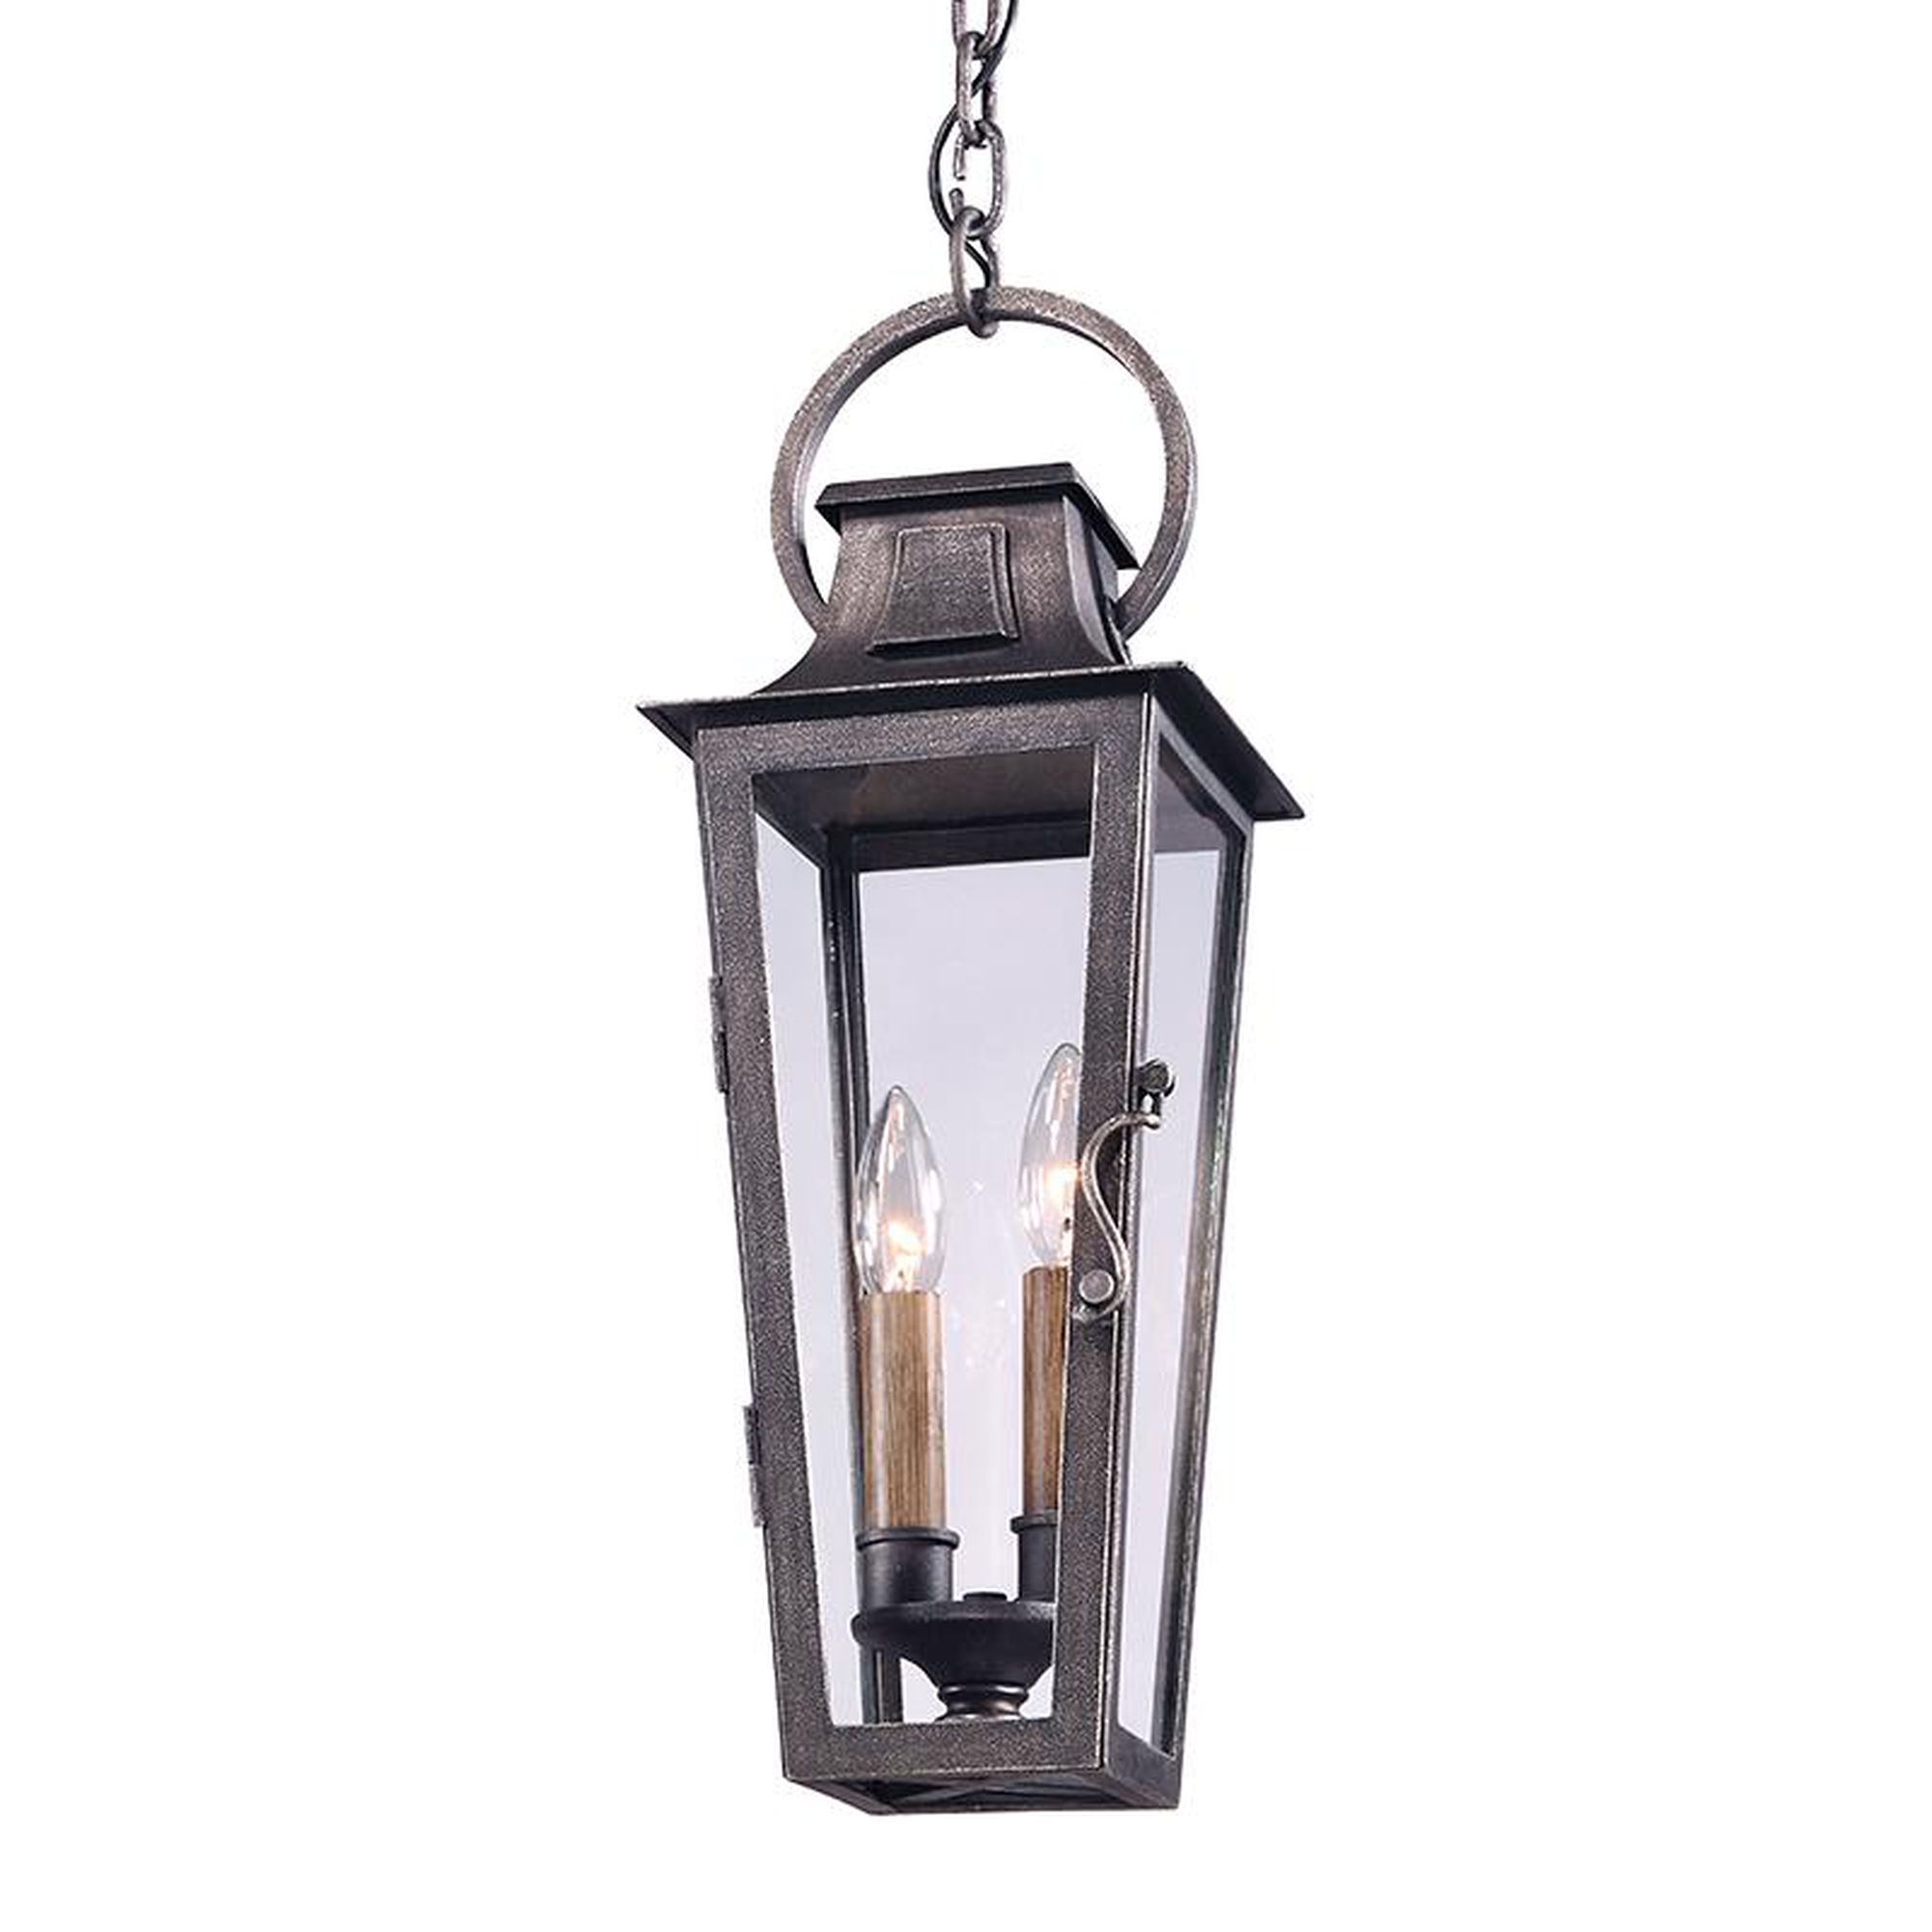 Parisian Square 20 Inch Tall 2 Light Outdoor Hanging Lantern by Troy Lighting | 1800 Lighting